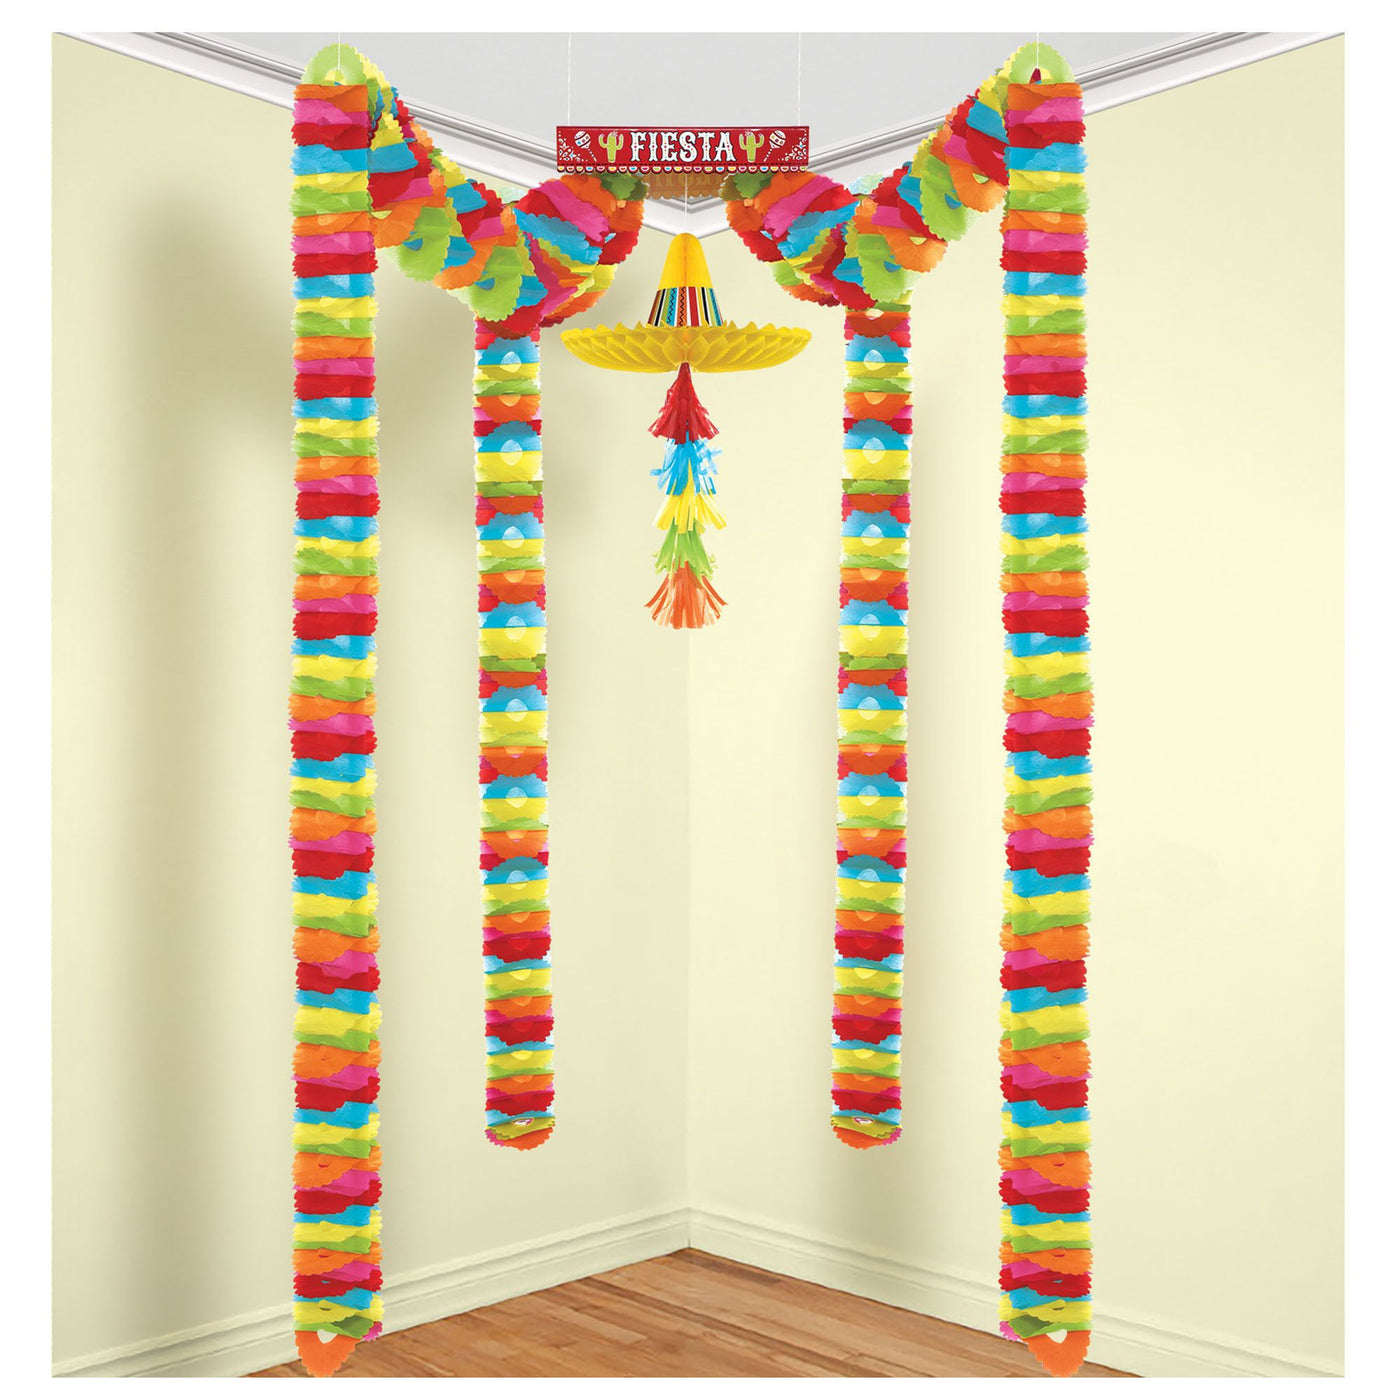 Fiesta All In One Decoration Kit